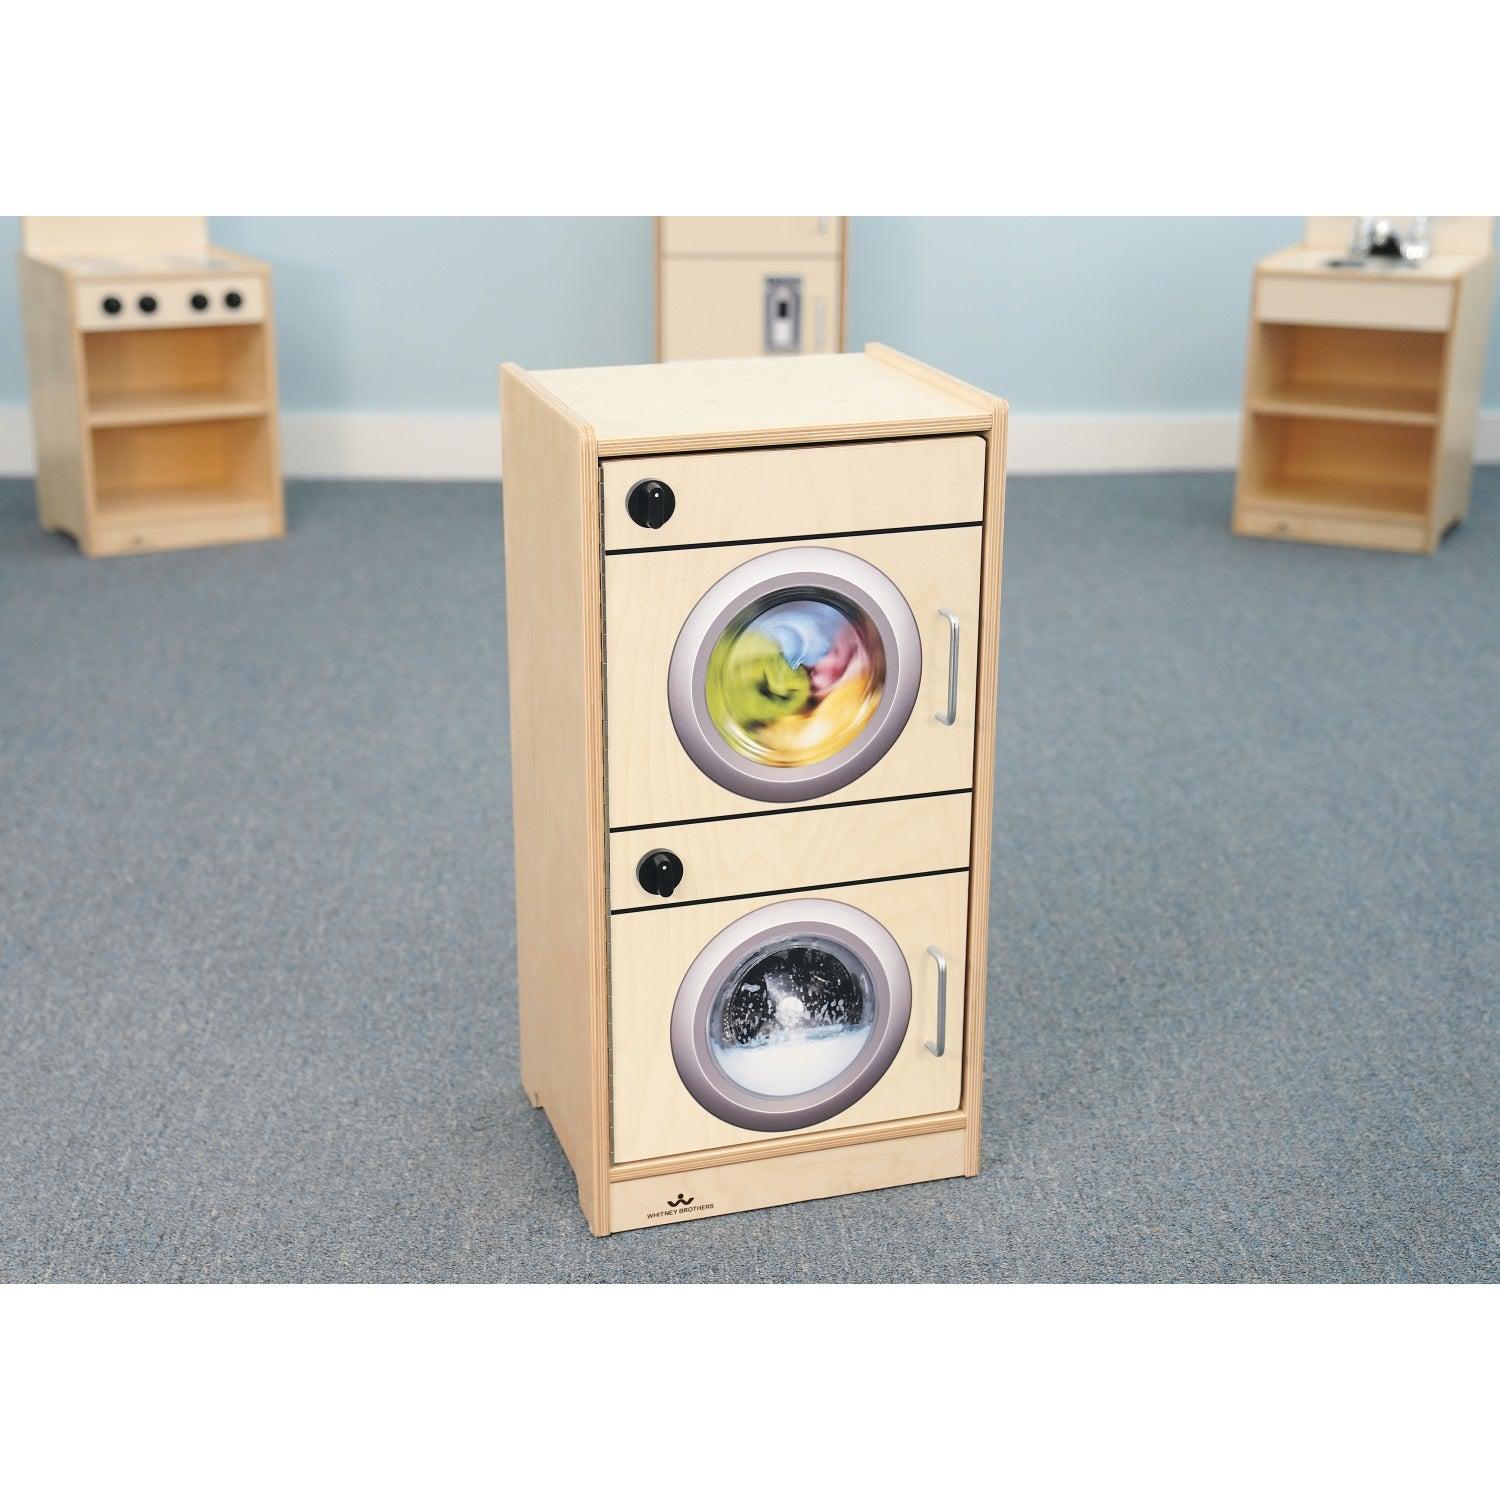 Let's Play Toddler Washer/Dryer, Natural Finish